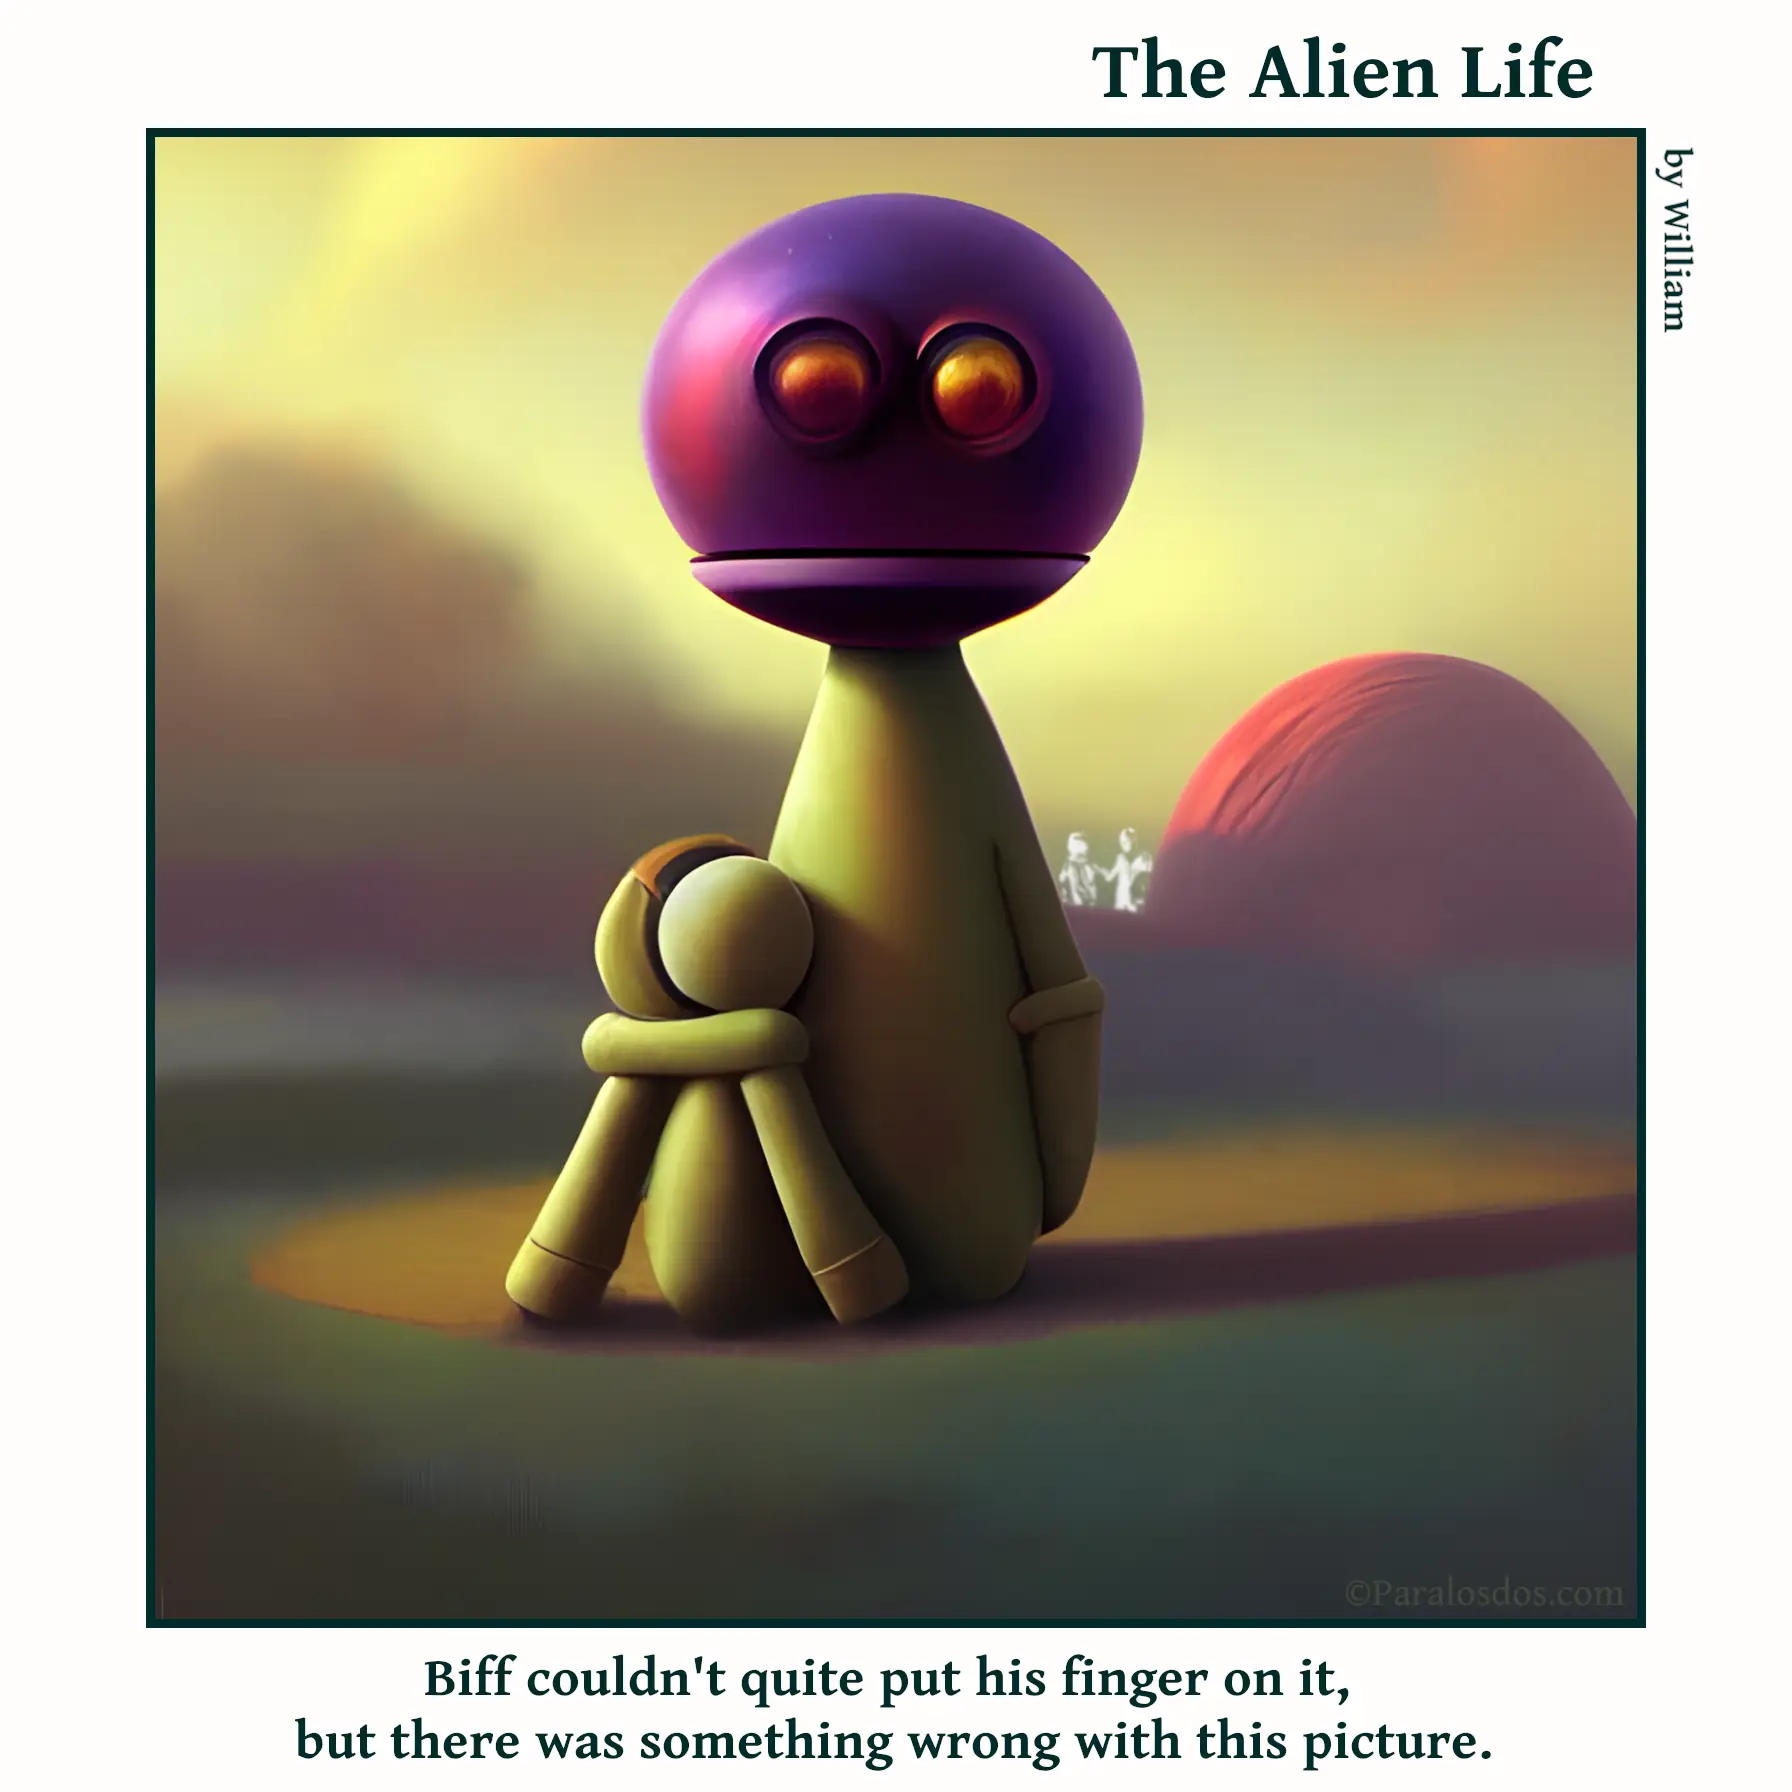 The Alien Life, one panel Comic. An alien is looking at smaller aliens close to and a bit in front. SOmething is off about the smaller aliens, you can't tell if it is one or two or what you are really seeing. The caption reads: Biff couldn't quite put his finger on it, but there was something wrong with this picture.